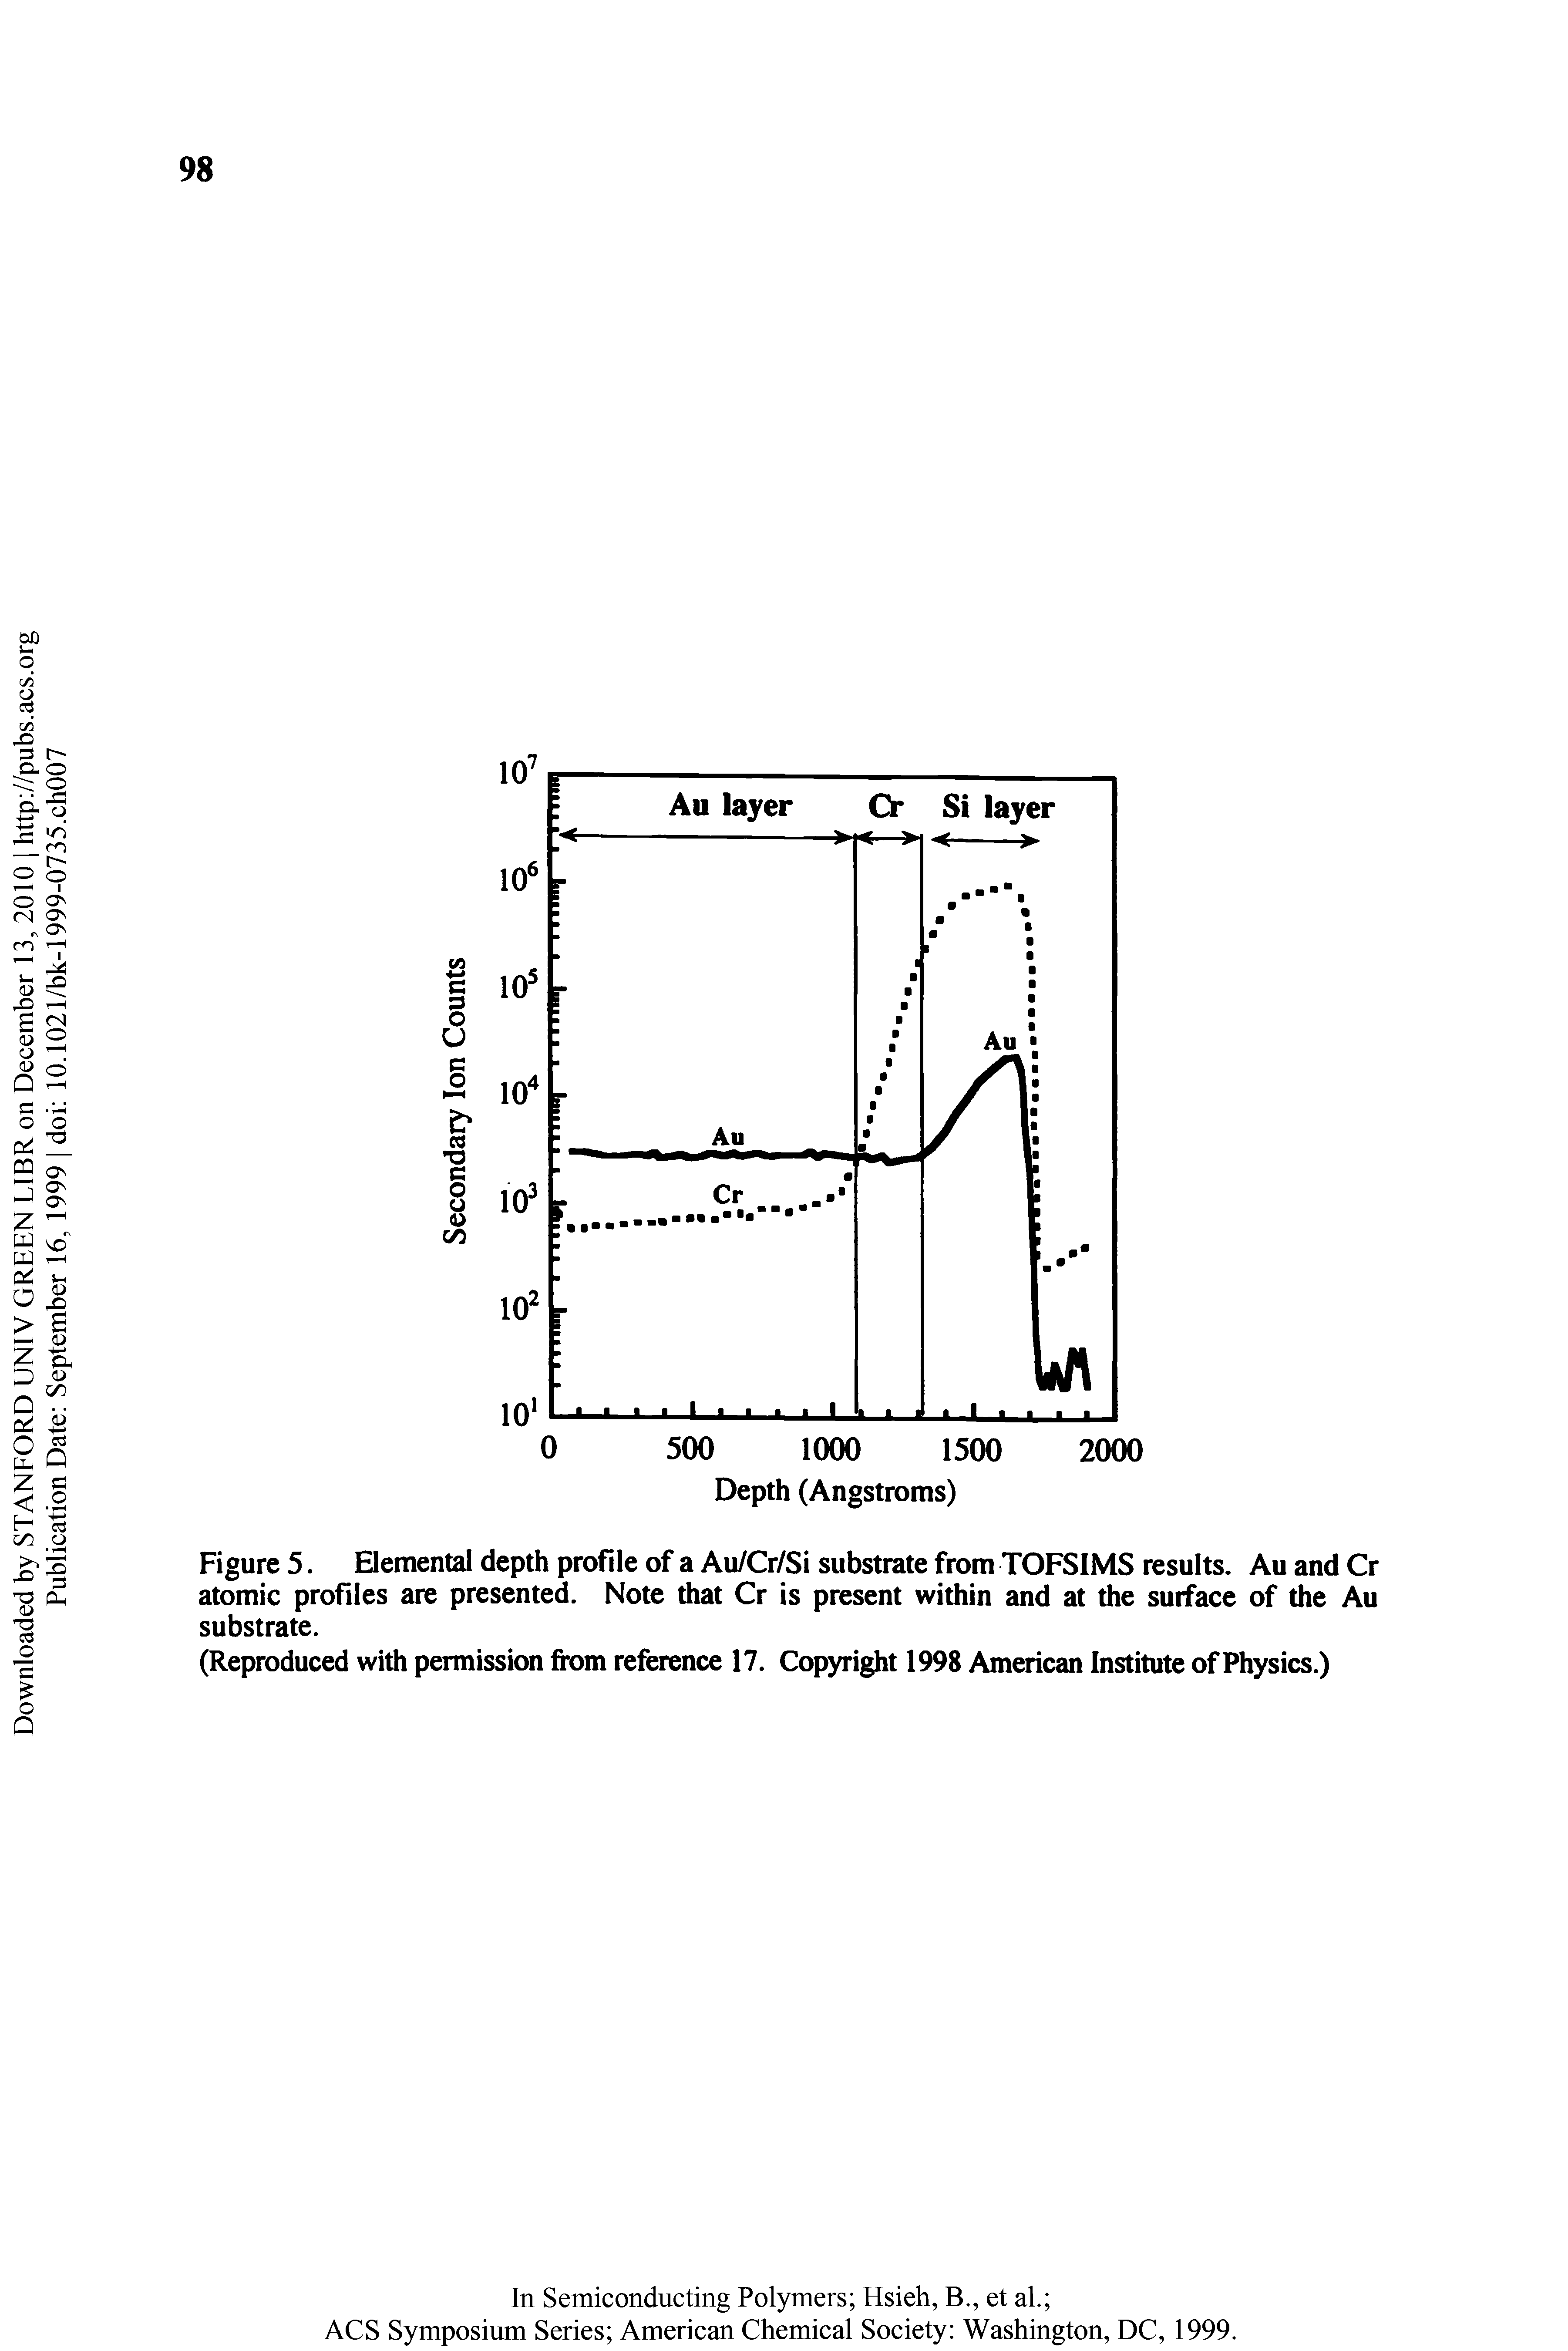 Figure 5. Elemental depth profile of a Au/Cr/Si substrate from TOFSIMS results, Au and Cr atomic profiles are presented. Note that Cr is present within and at the surface of the Au substrate.